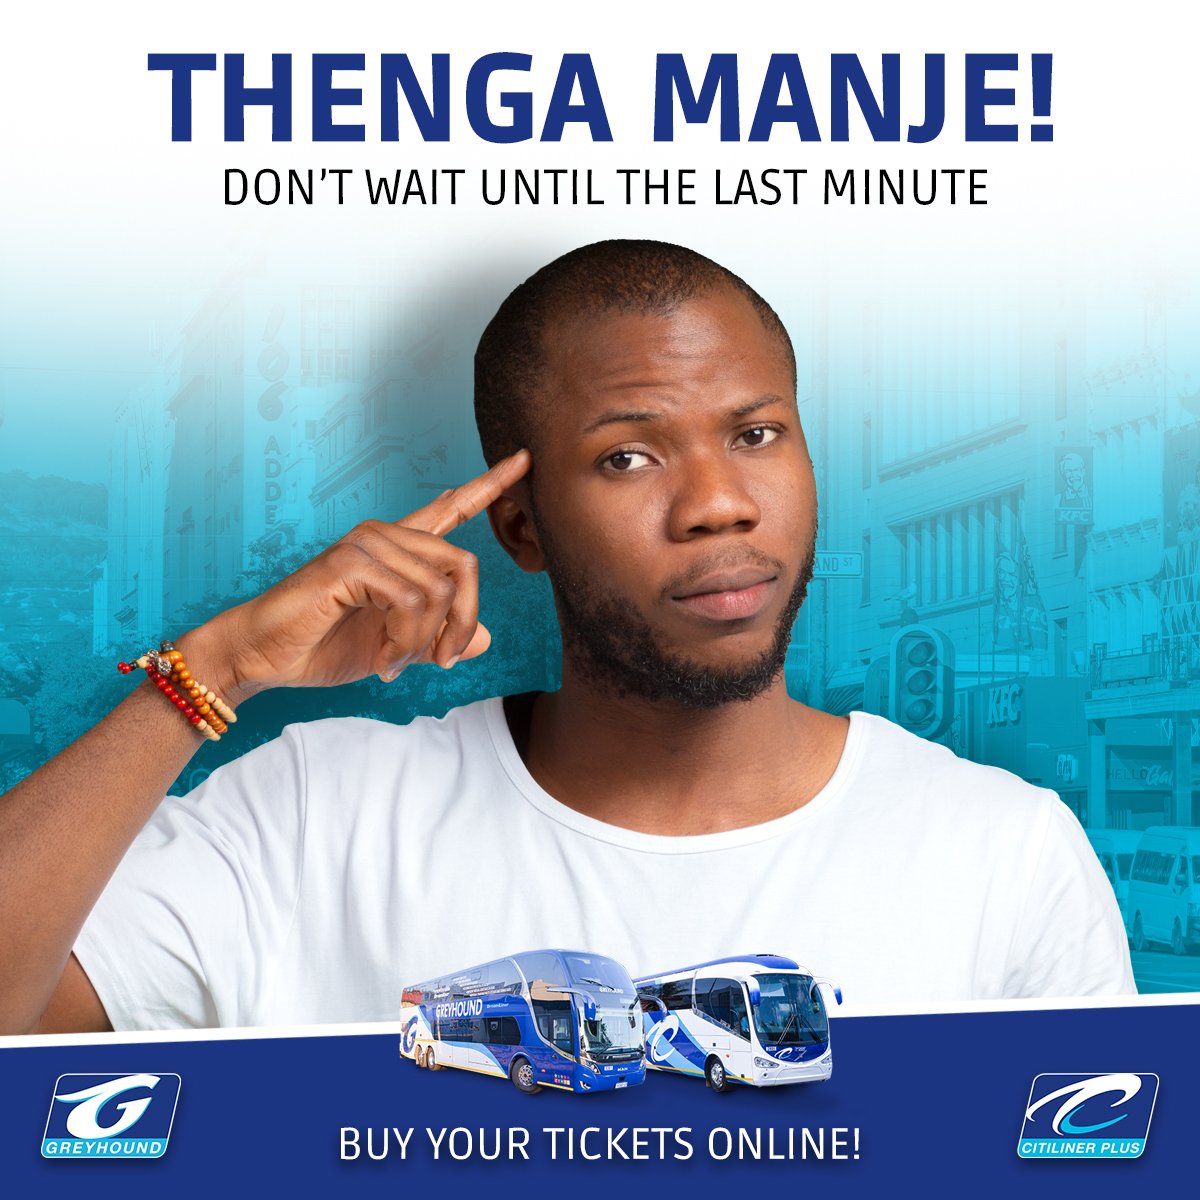 Thenga manje! Don't wait until the last minute.😉​ Whether you're heading home for the holidays or travelling for work, school, or leisure, buying your tickets early ensures that you get the best seats at the best prices. 🚌🙌